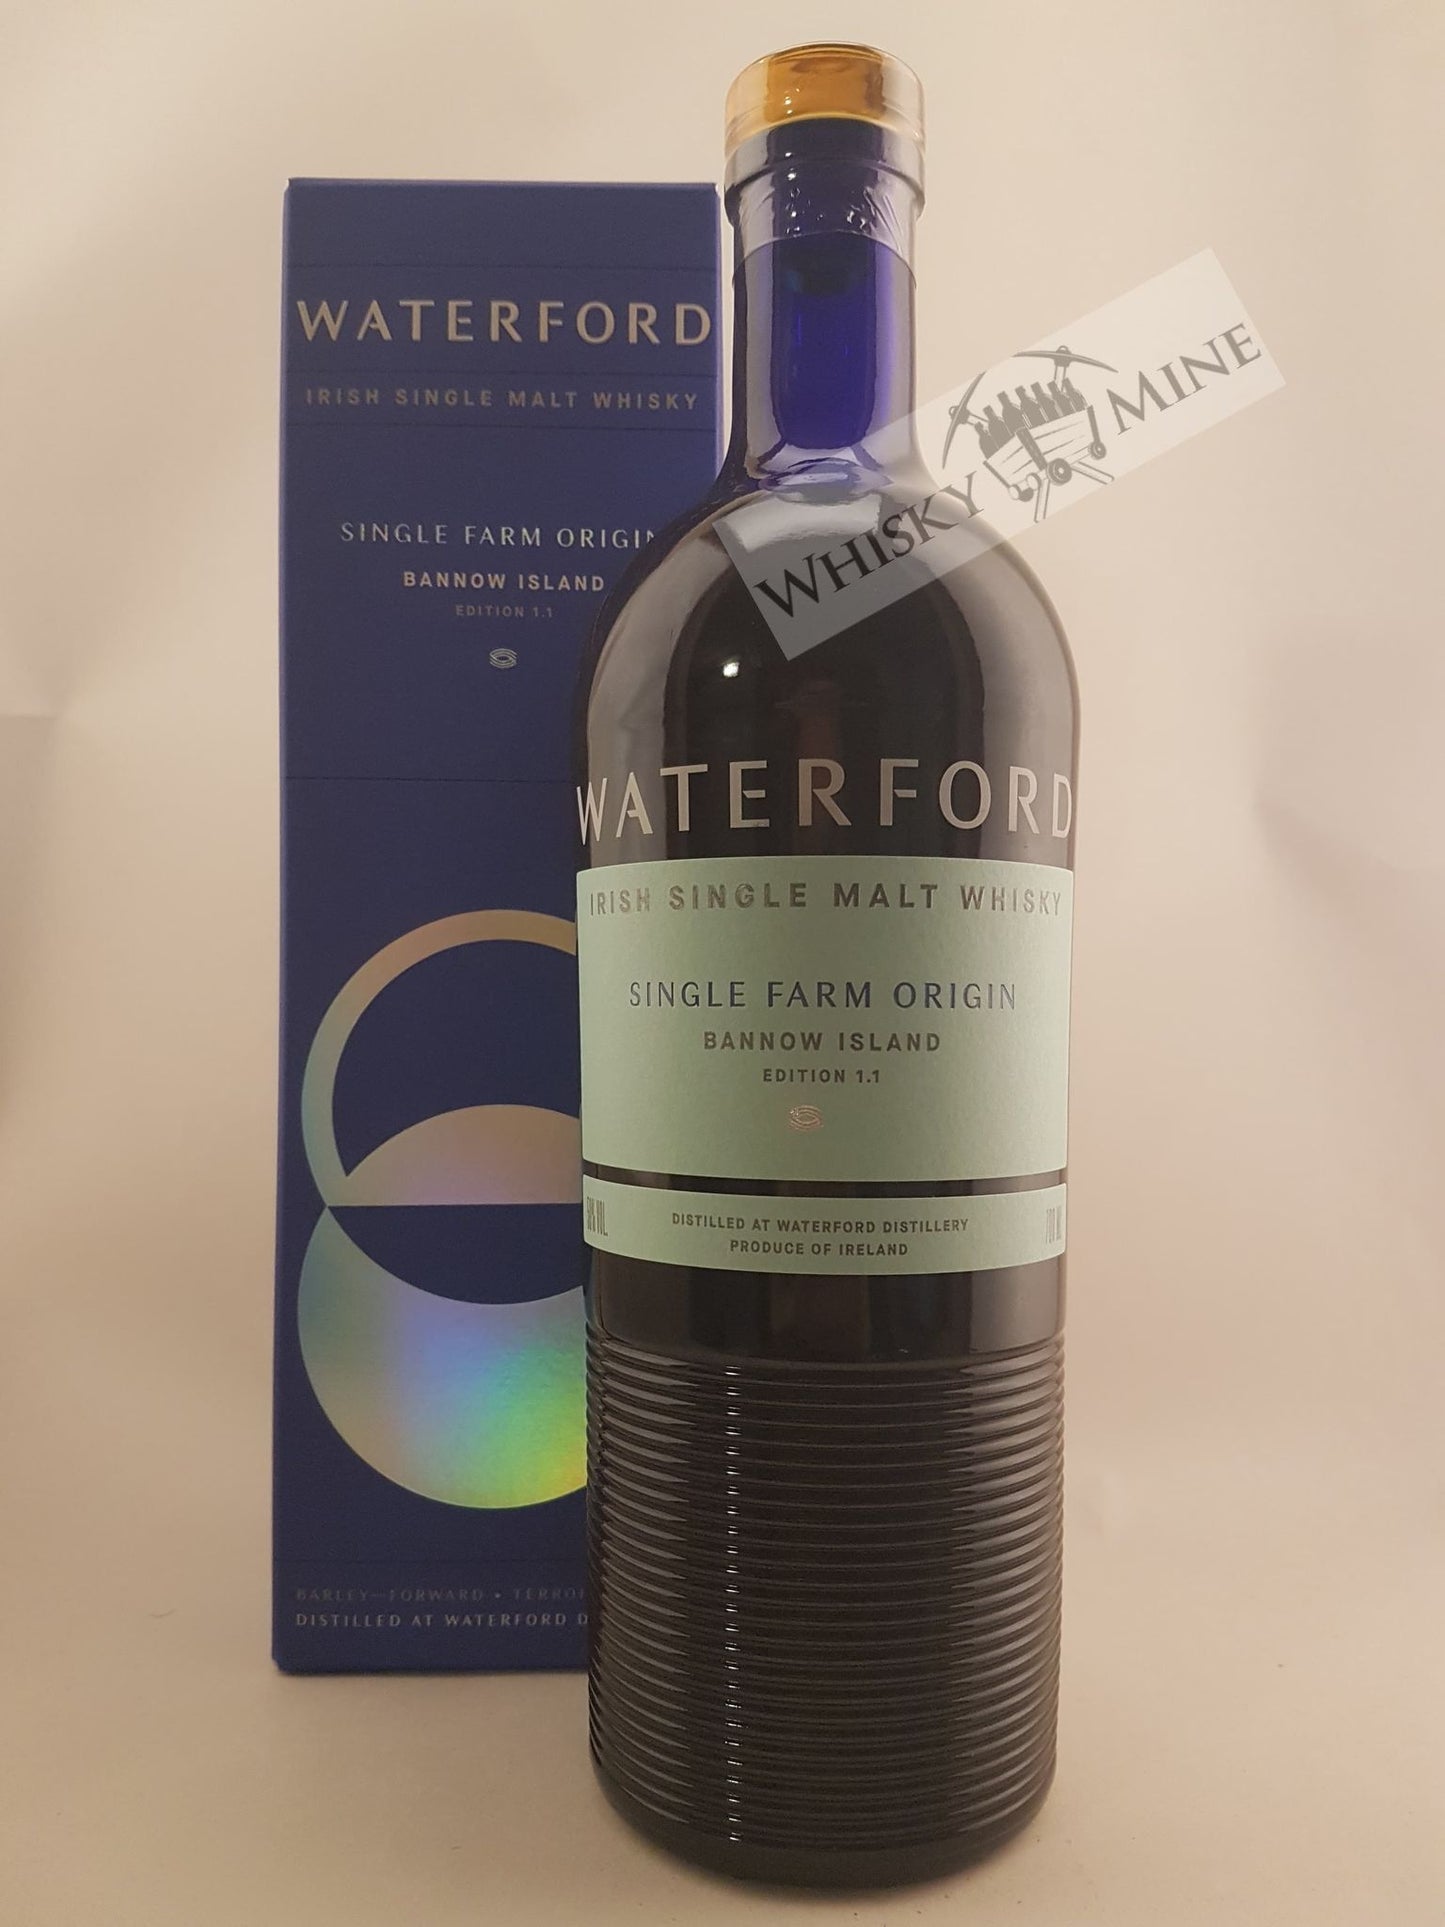 Waterford Bannow Island 1.1 50% 70cl